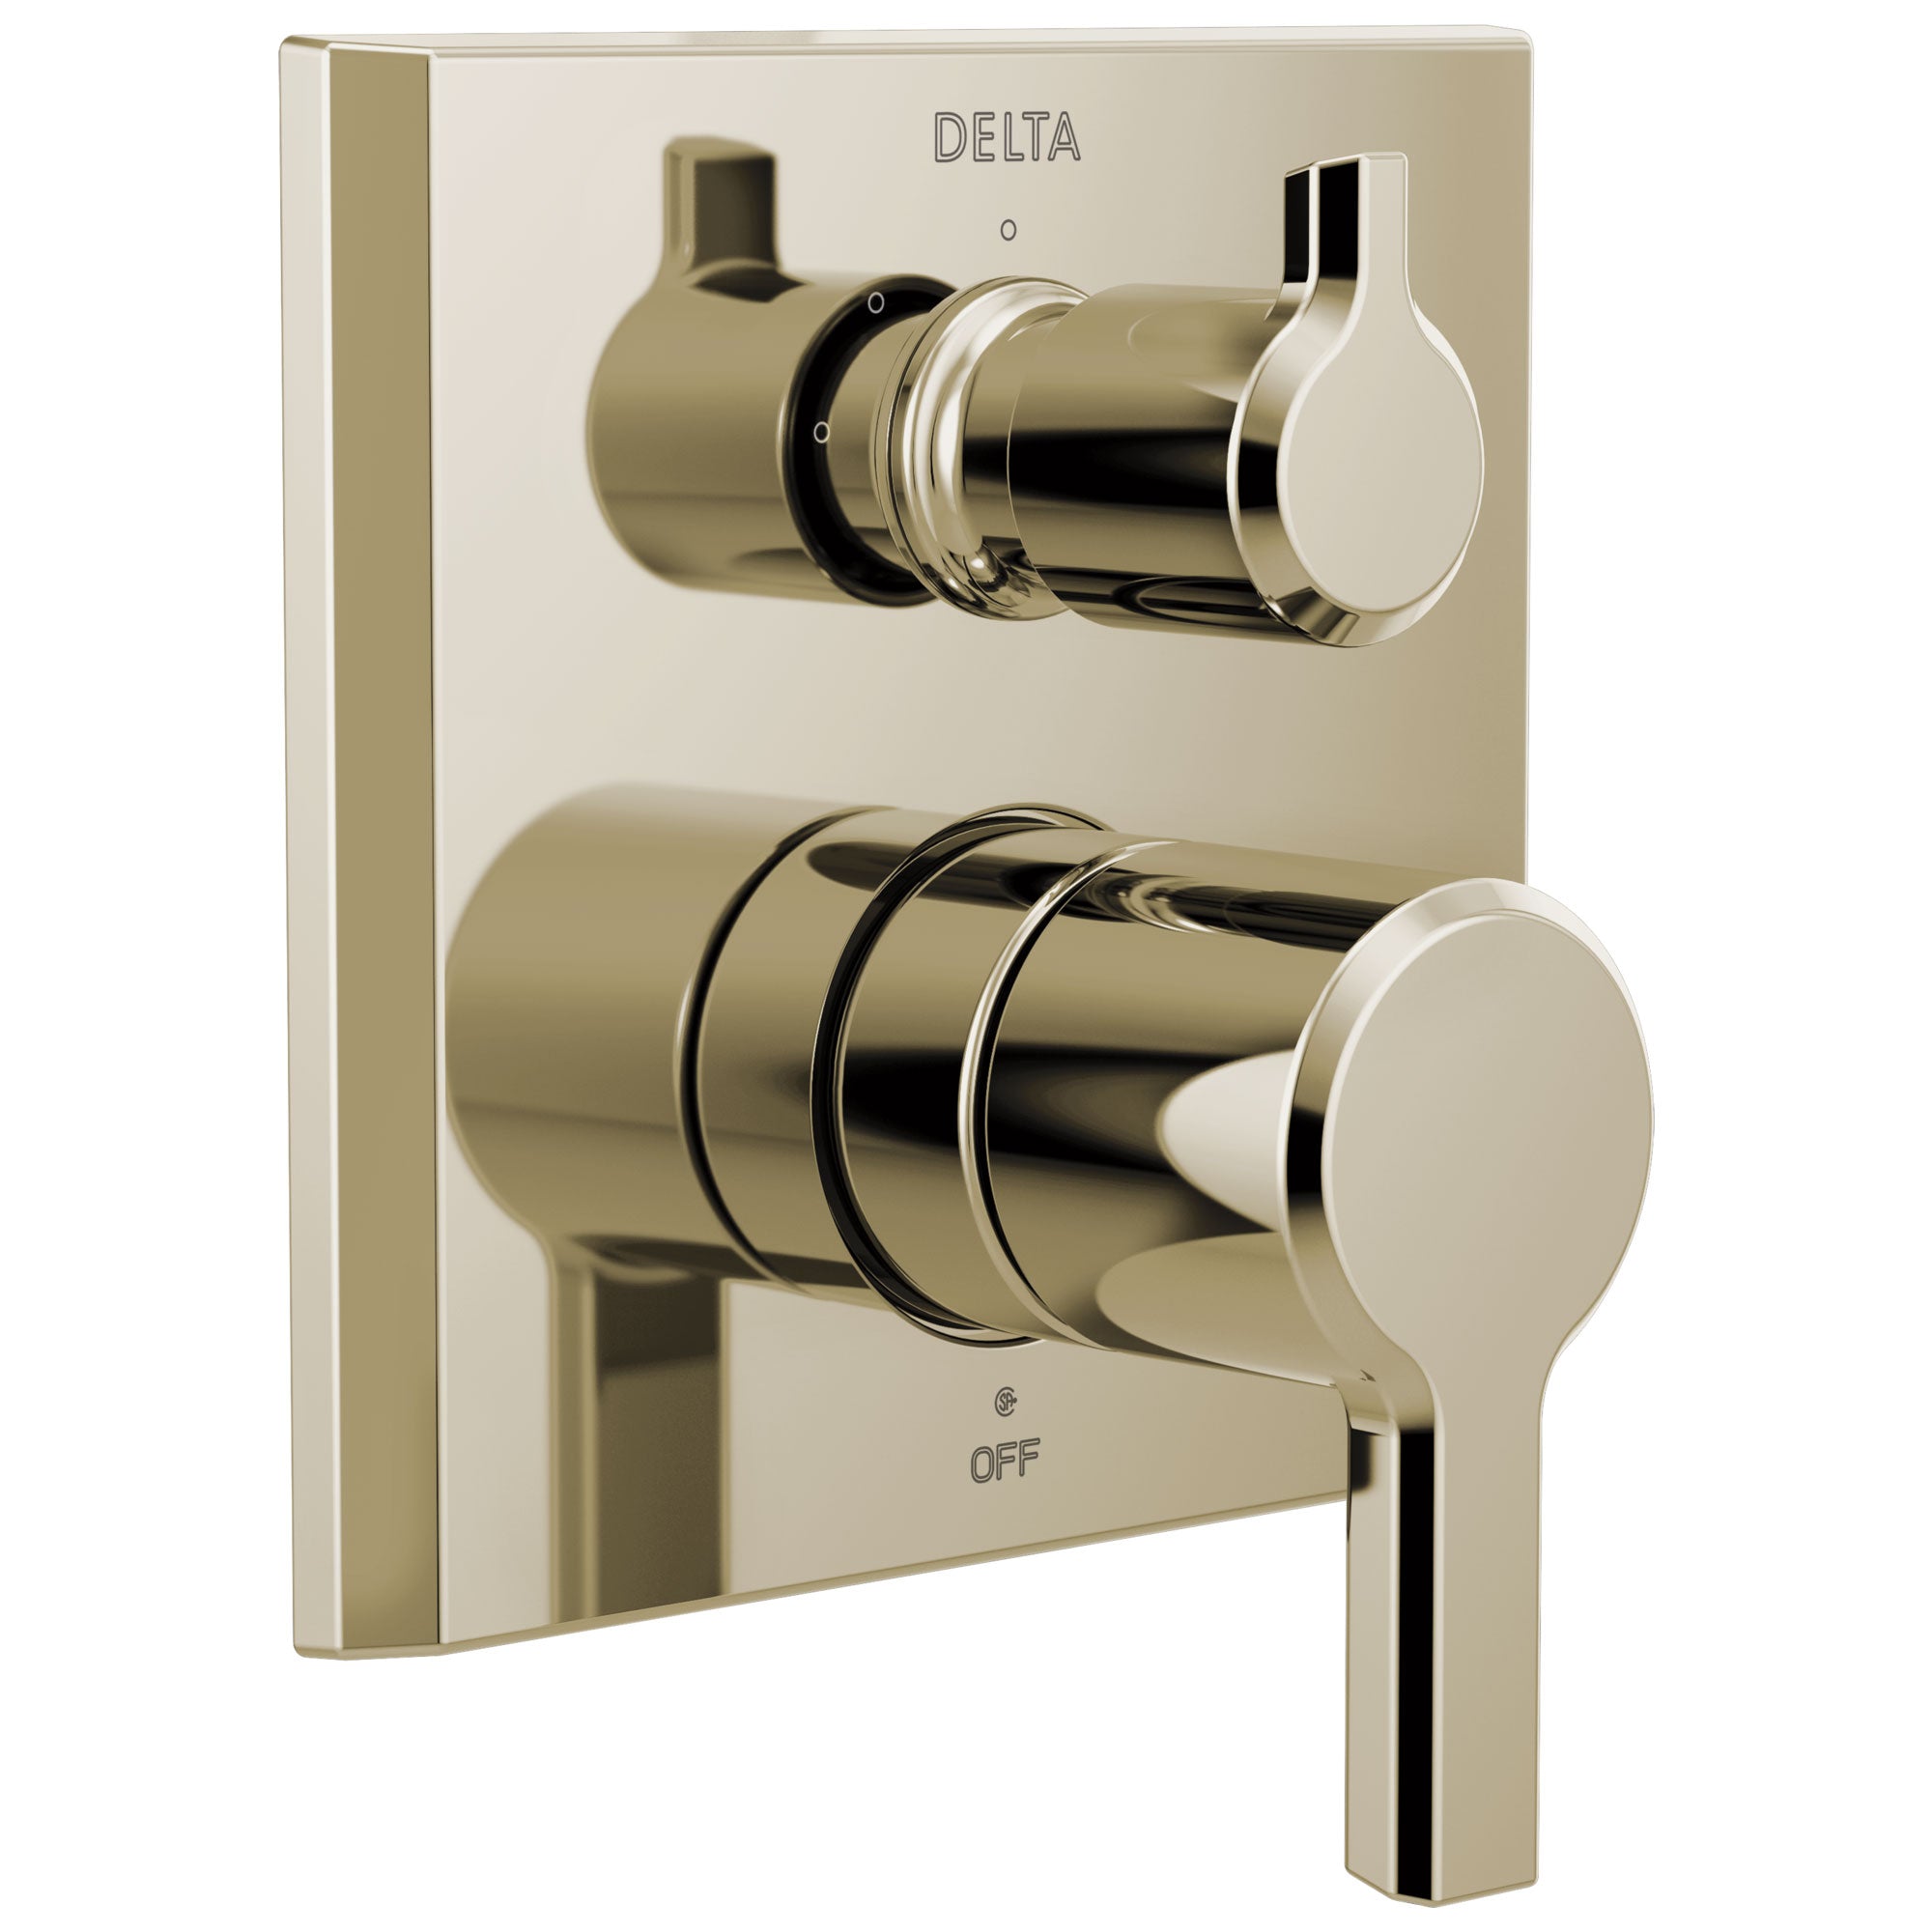 Delta Pivotal Polished Nickel Finish Monitor 14 Series Shower Control Trim Kit with 3-Setting Integrated Diverter (Requires Valve) DT24899PN